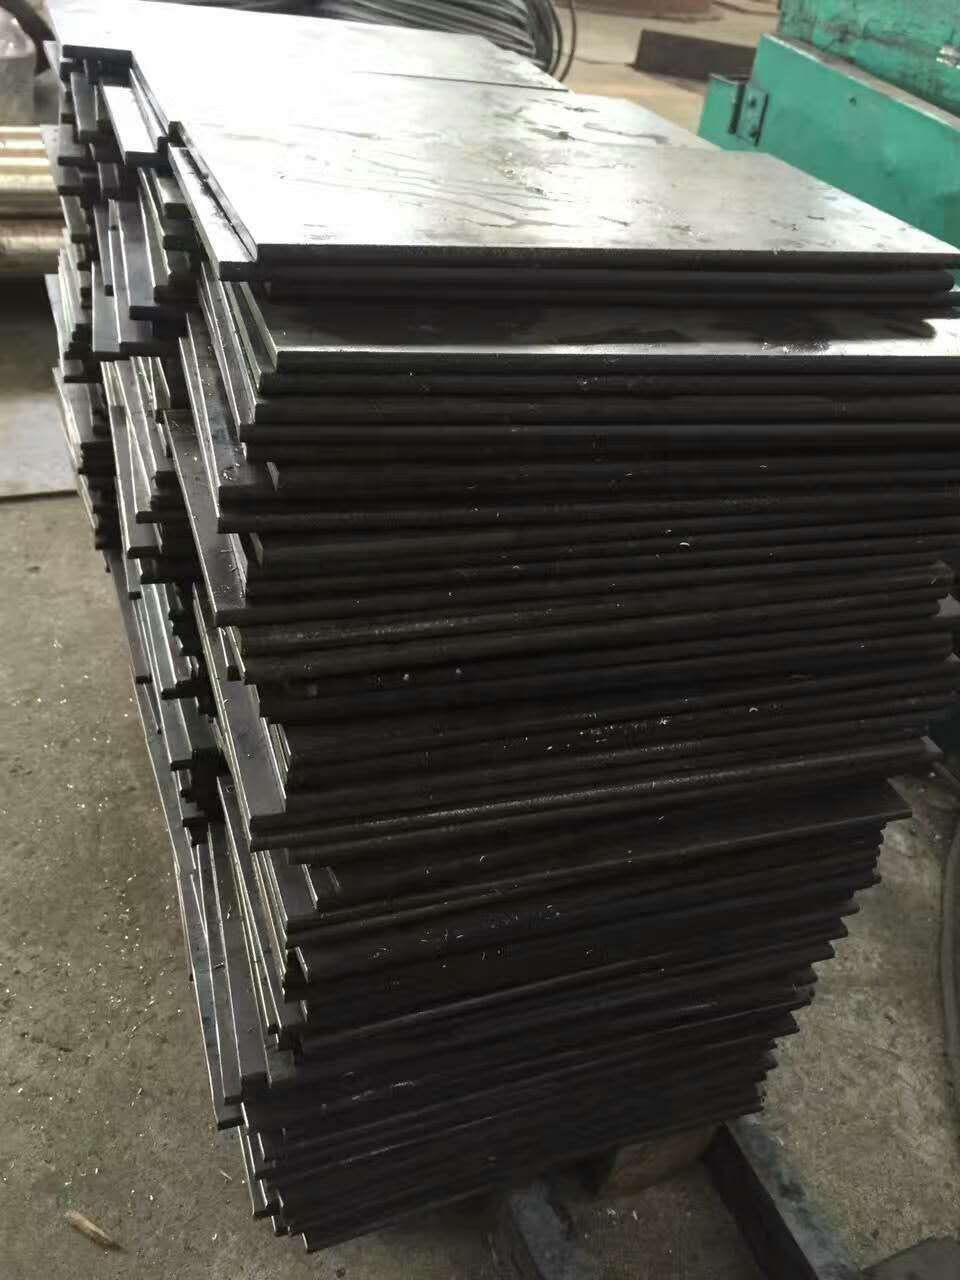 Incoloy 800 Plate with Good corrosion resistance in many acidic environments